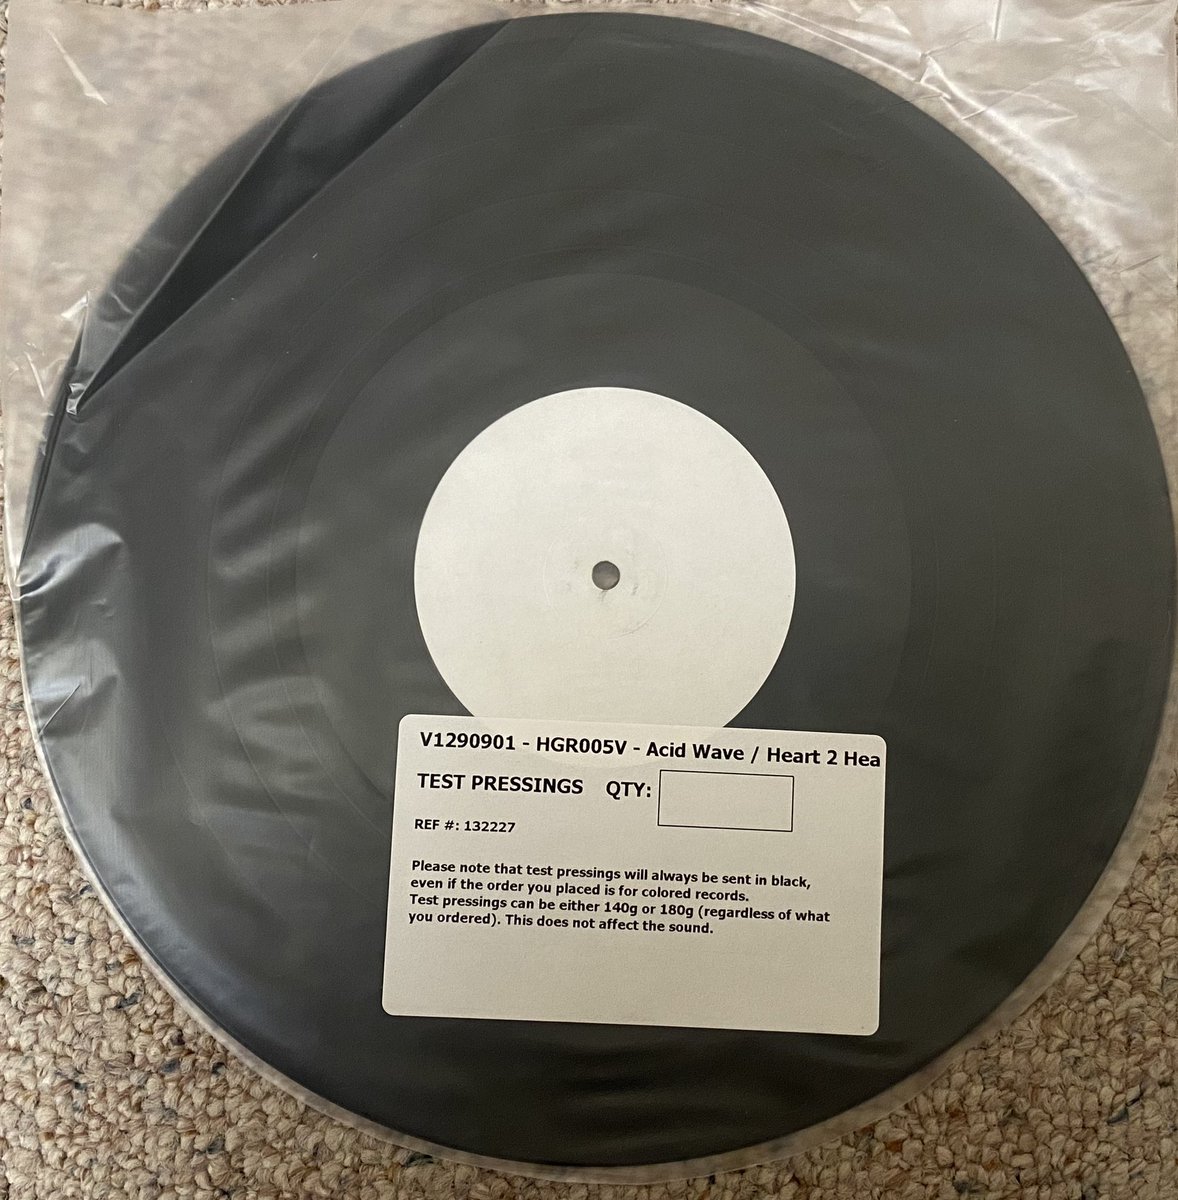 Hi everyone - we have a surprise for Bandcamp Friday! You can buy a test pressing for the @acidwaveband heart2heart vinyl, exclusively on Bandcamp. There are only 10 available, so pick up a copy before they sell out. acidwaveband.bandcamp.com/album/heart2he… Thank you again for your support! 💜